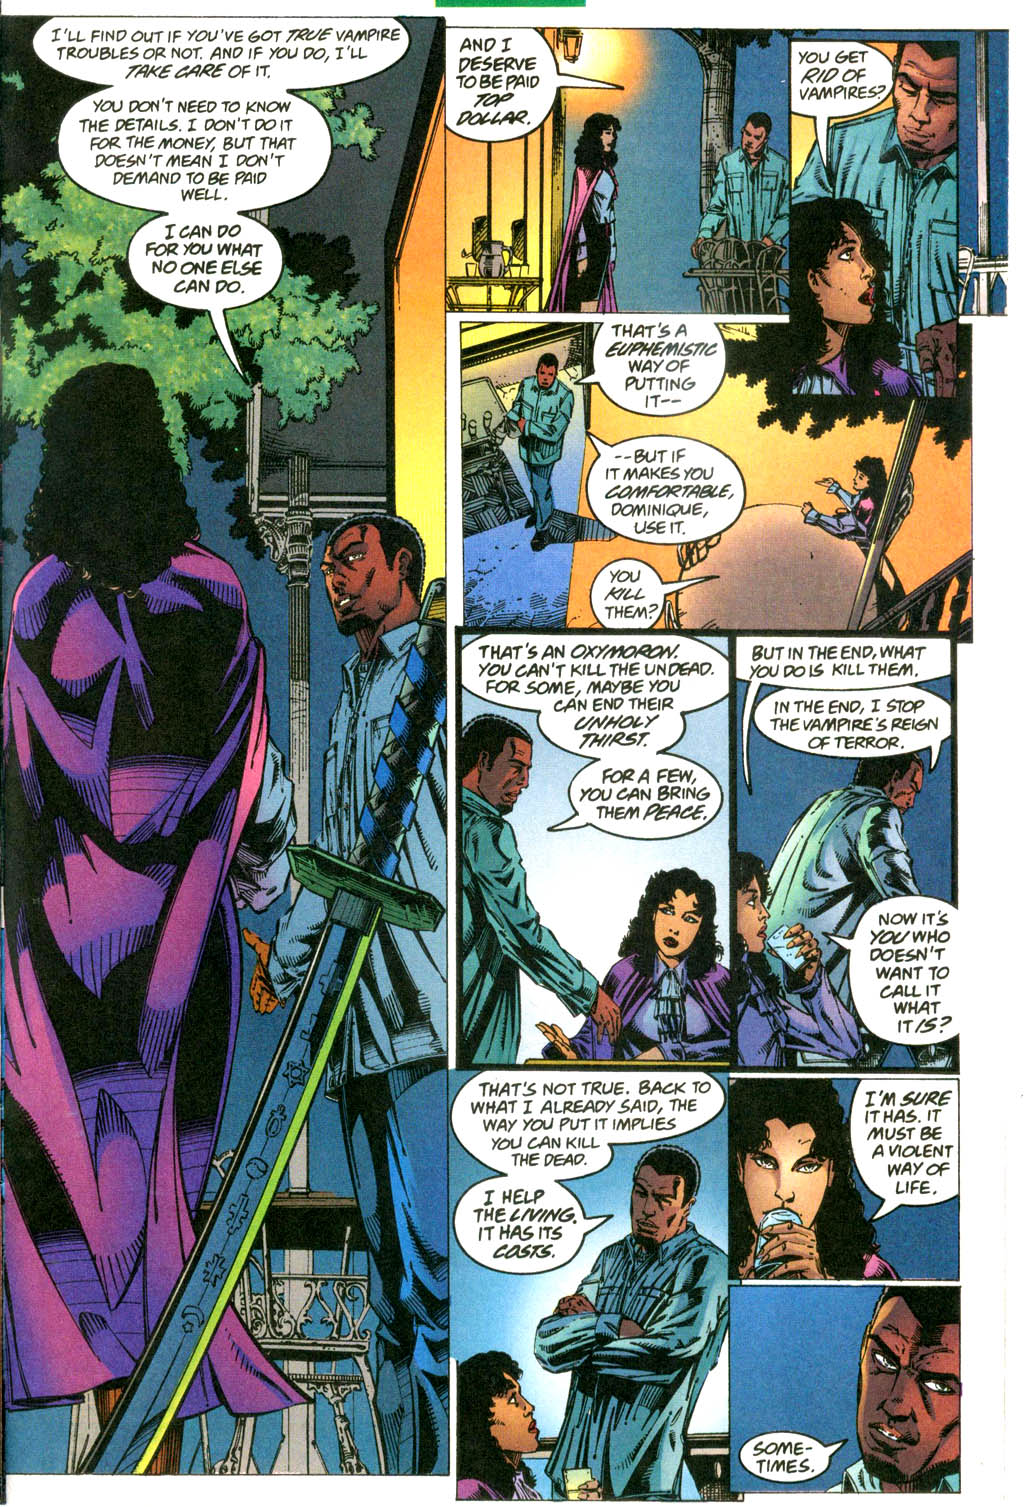 Blade (1998) 1 Page 21